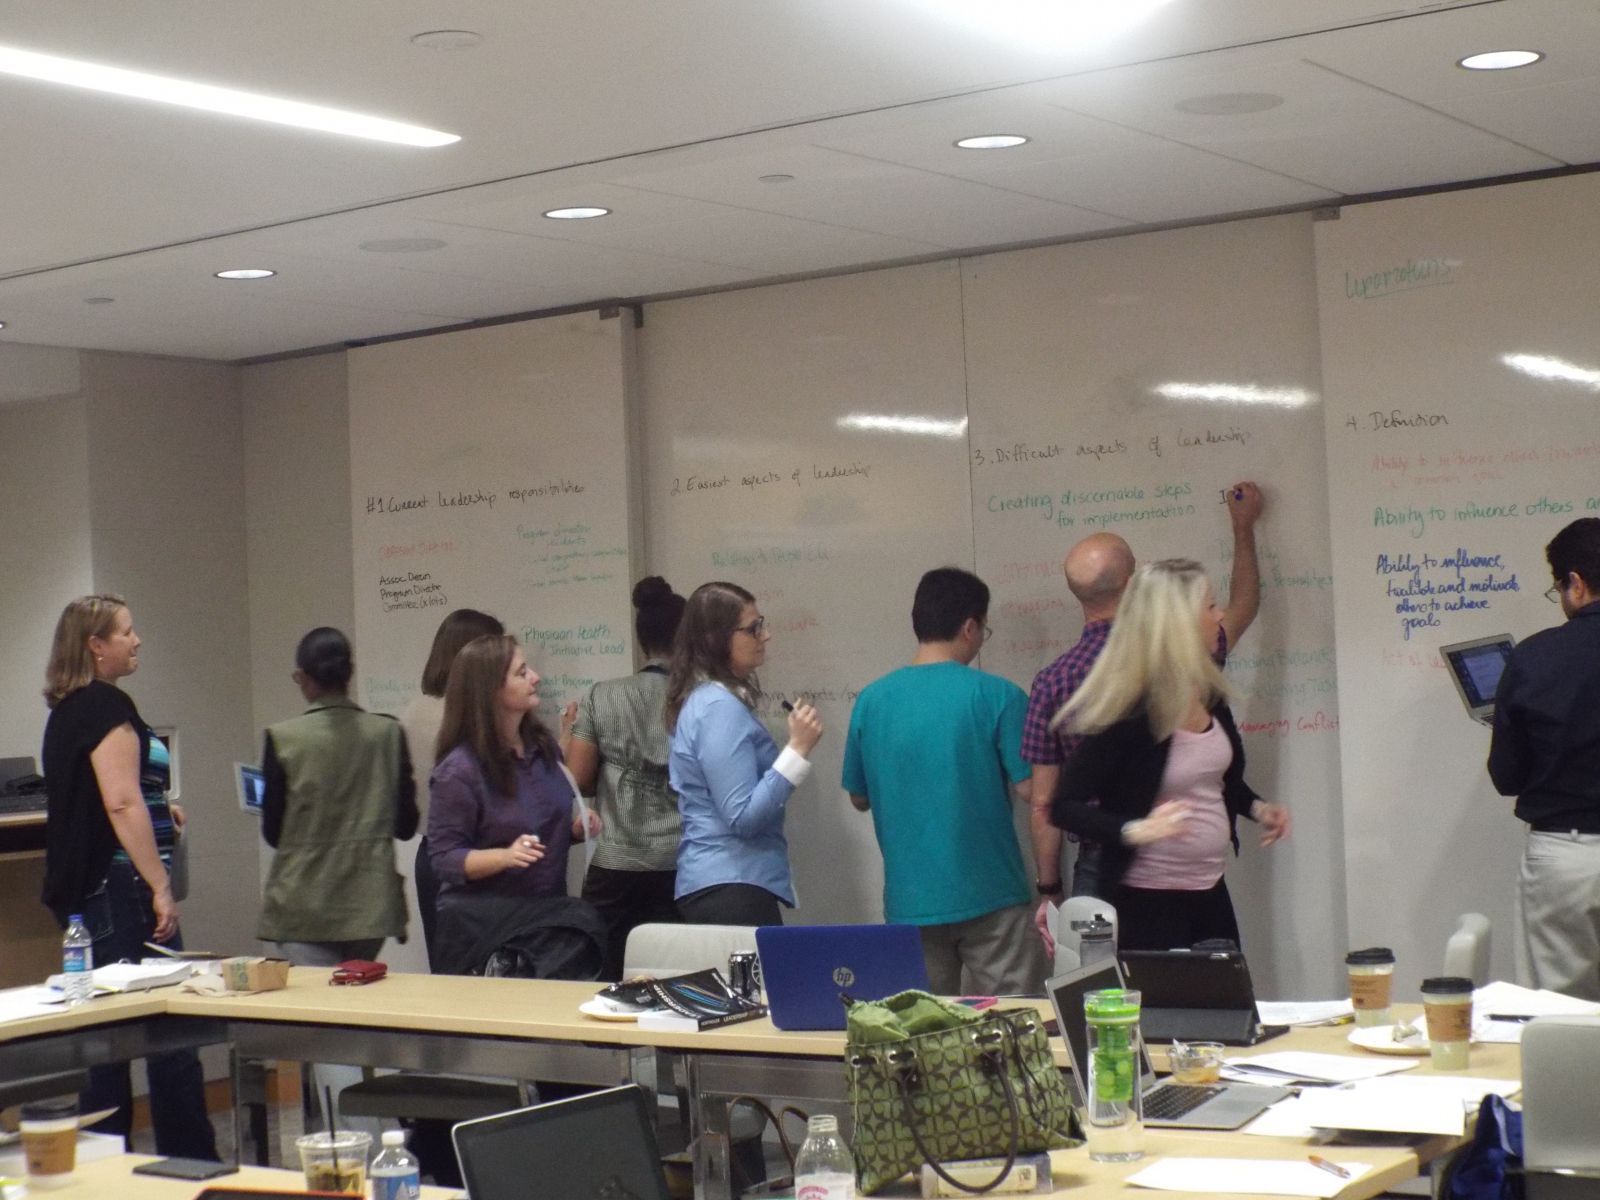 Participants writing on a whiteboard and collaborating